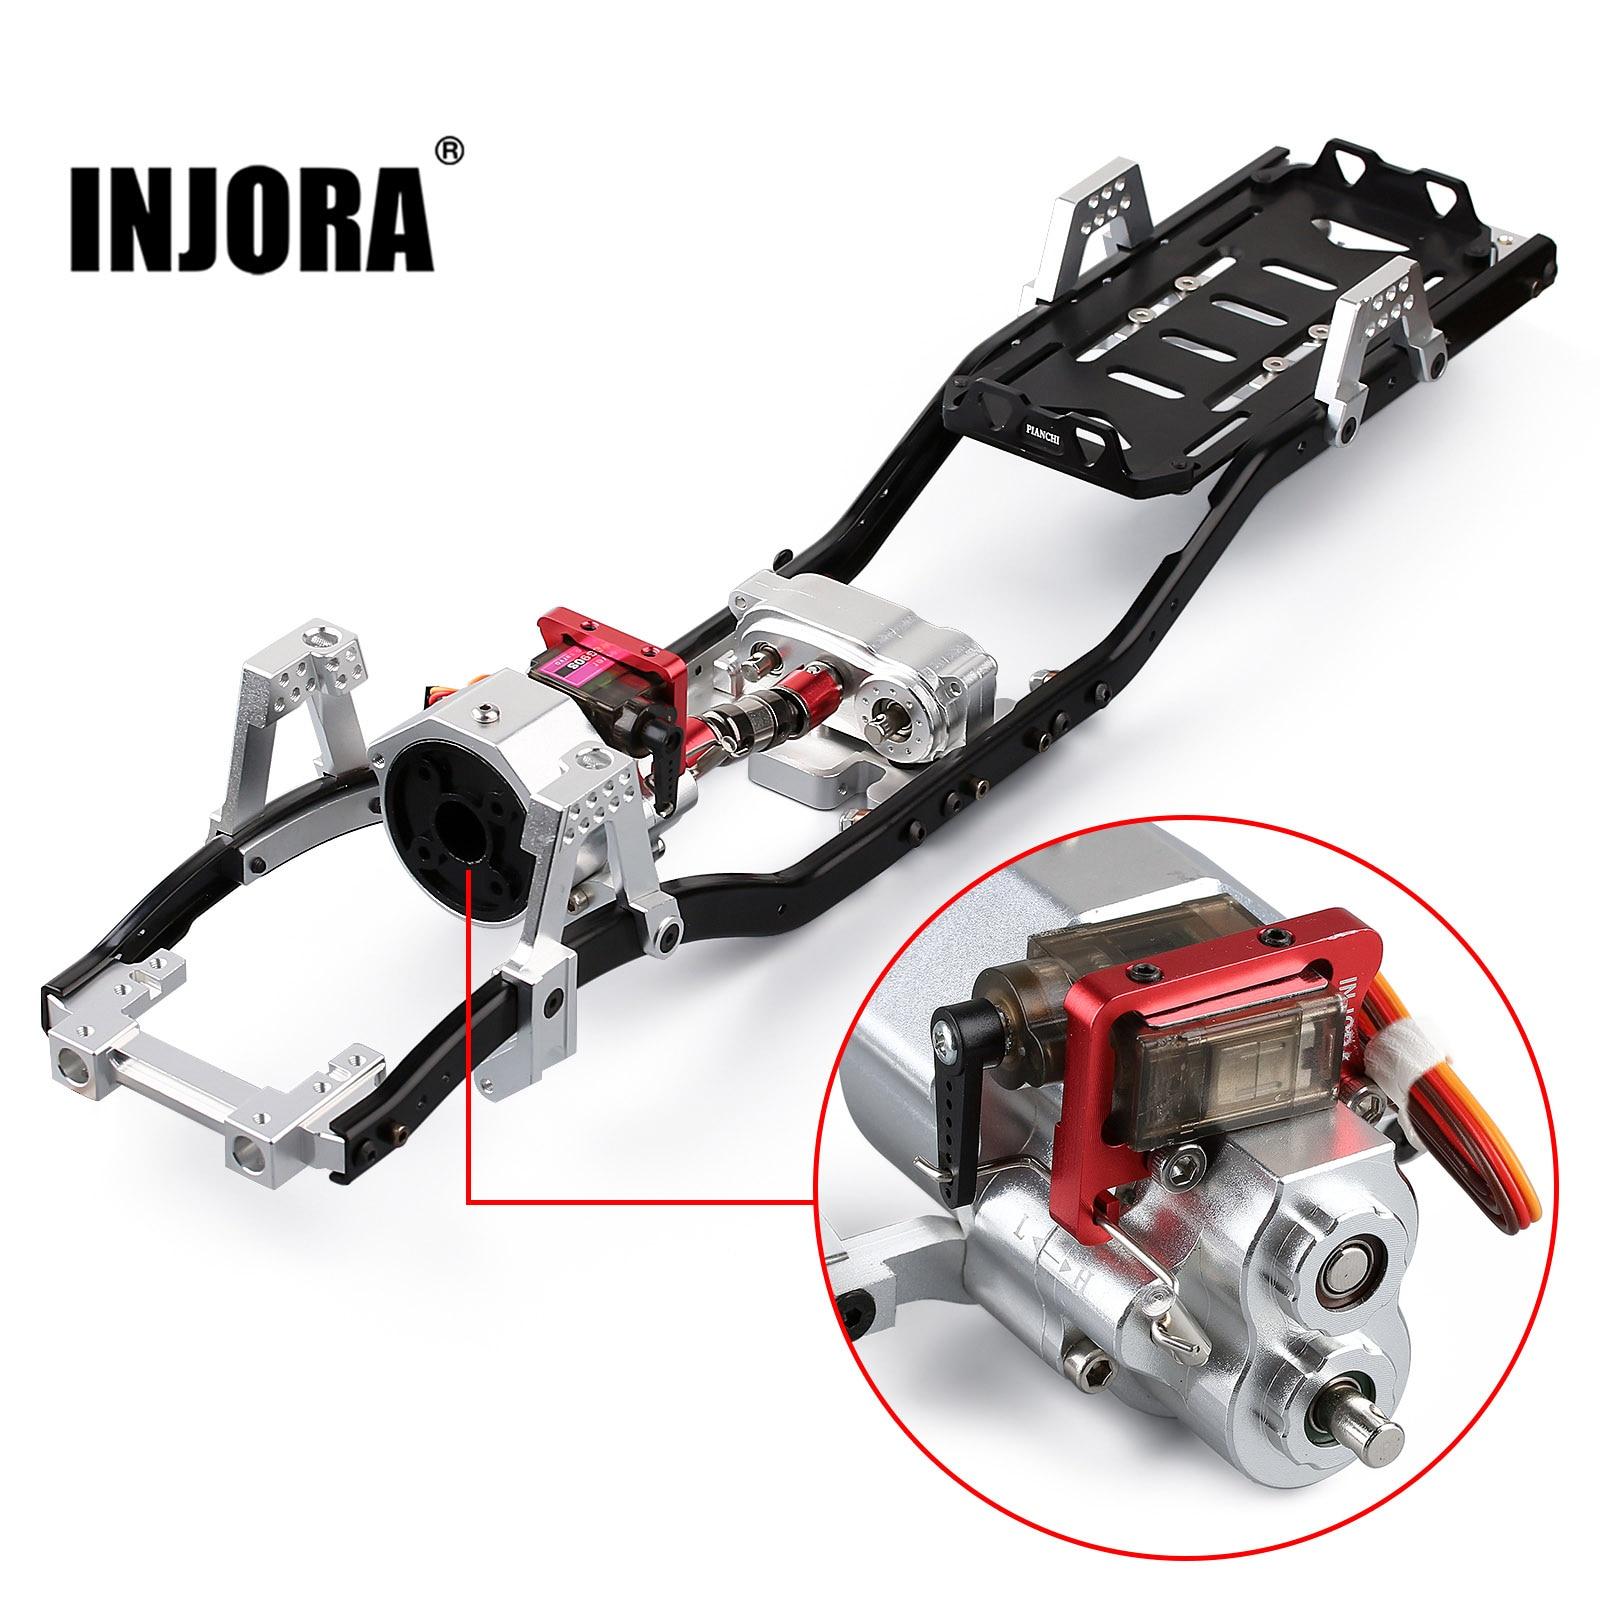 INJORA-313mm-12-3-Wheelbase-Metal-Chassis-Frame-with-Prefixal-Shiftable-Gearbox-for-1-10-RC.jpg